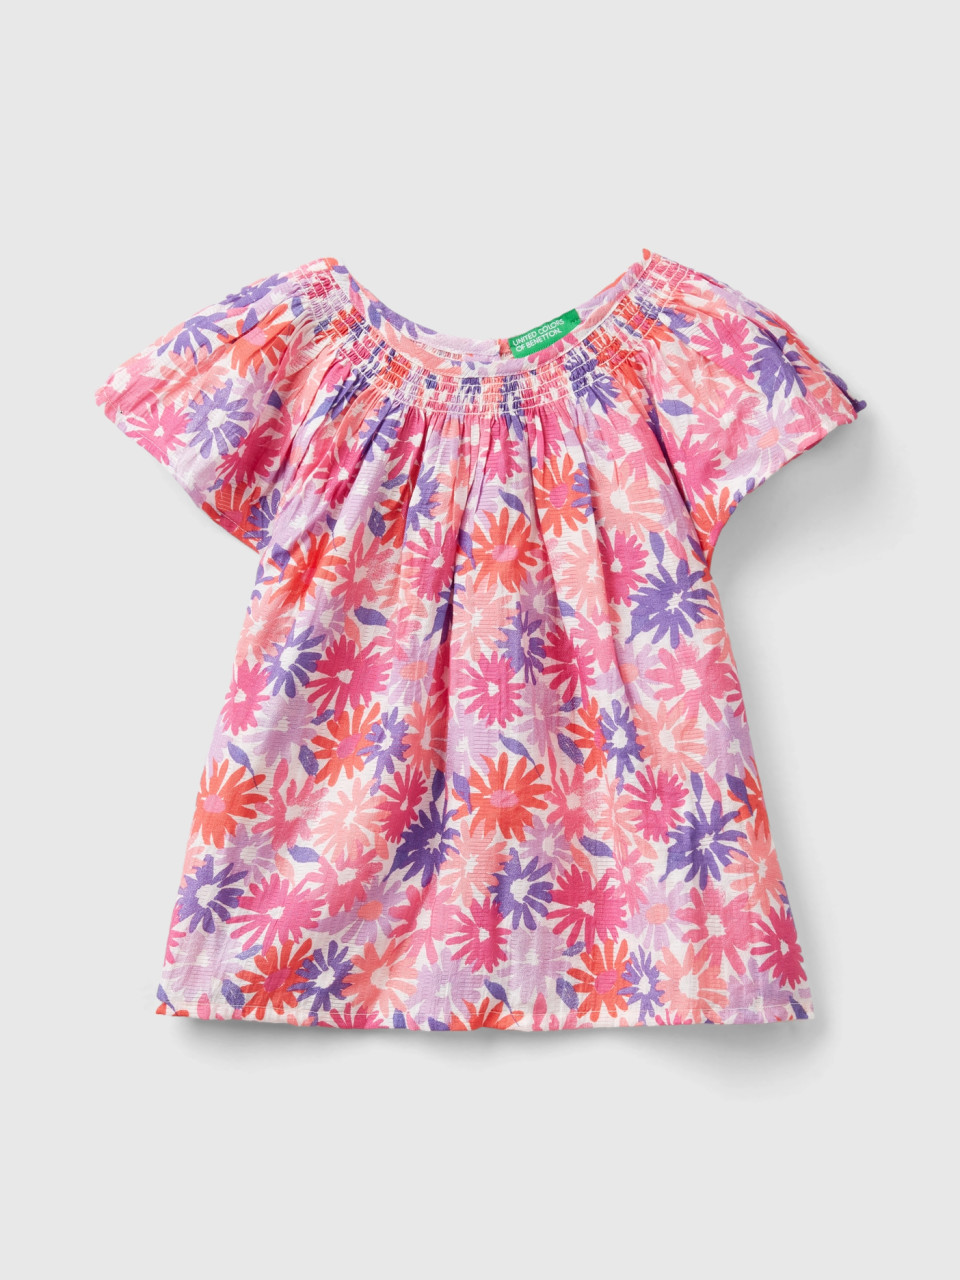 Benetton, Blouse With Floral Print, Multi-color, Kids